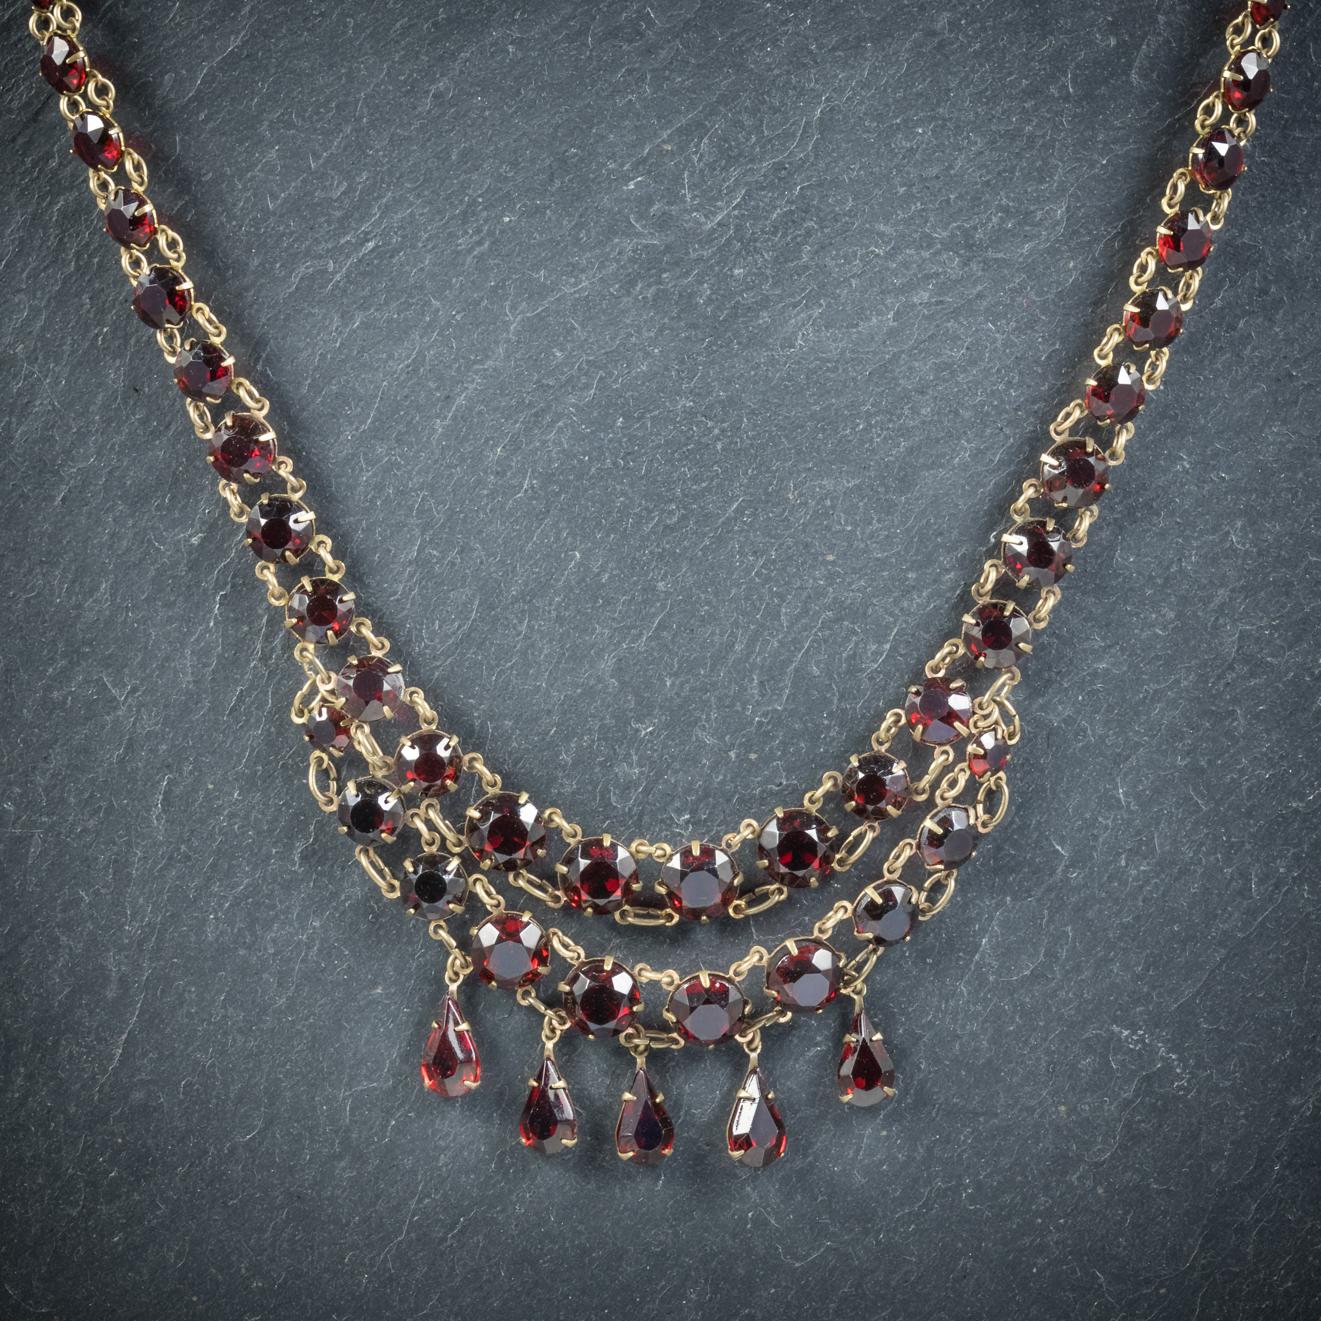 A grand antique Riviere necklace from the Victorian era, Circa 1900

The fabulous piece is decorated throughout with deep red Glass stones that resemble Garnets, graduating in size to five beautiful glass droppers

All set in Base Metal displaying